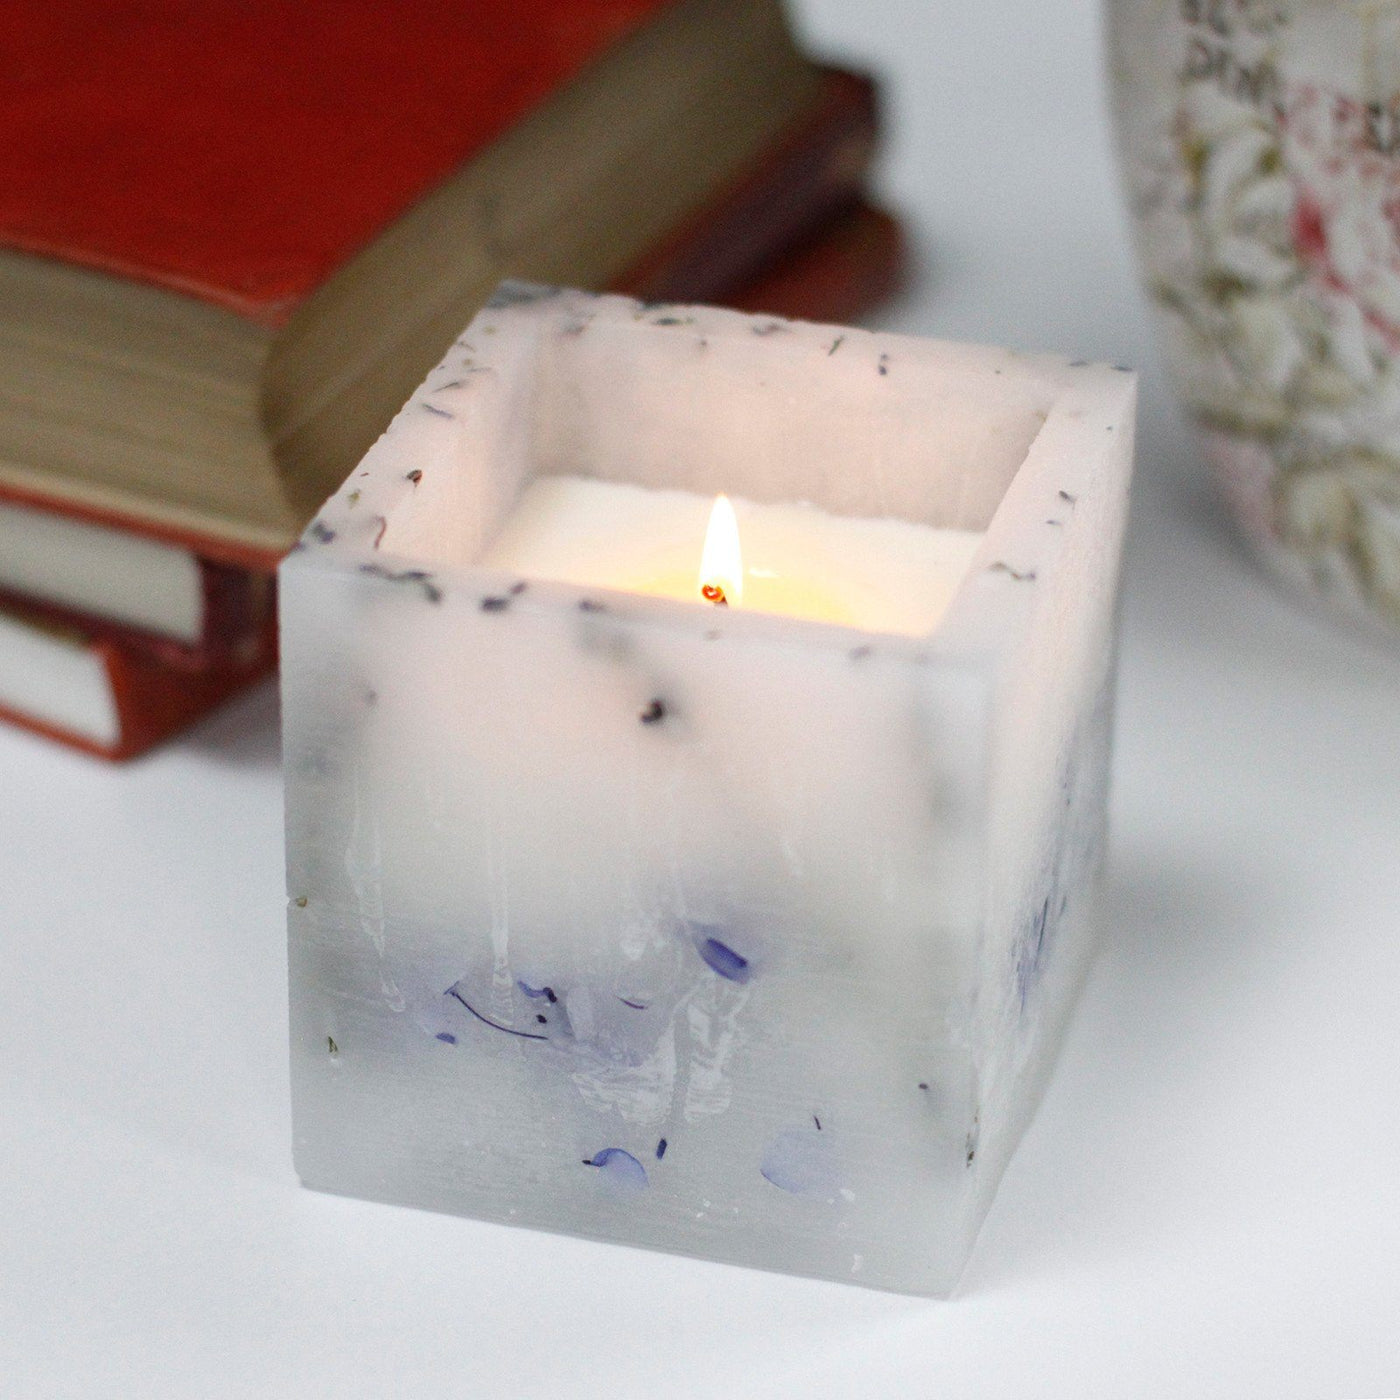 Large Soy Wax Enchanted Real Lavender Flowers Candle In Gift Box.